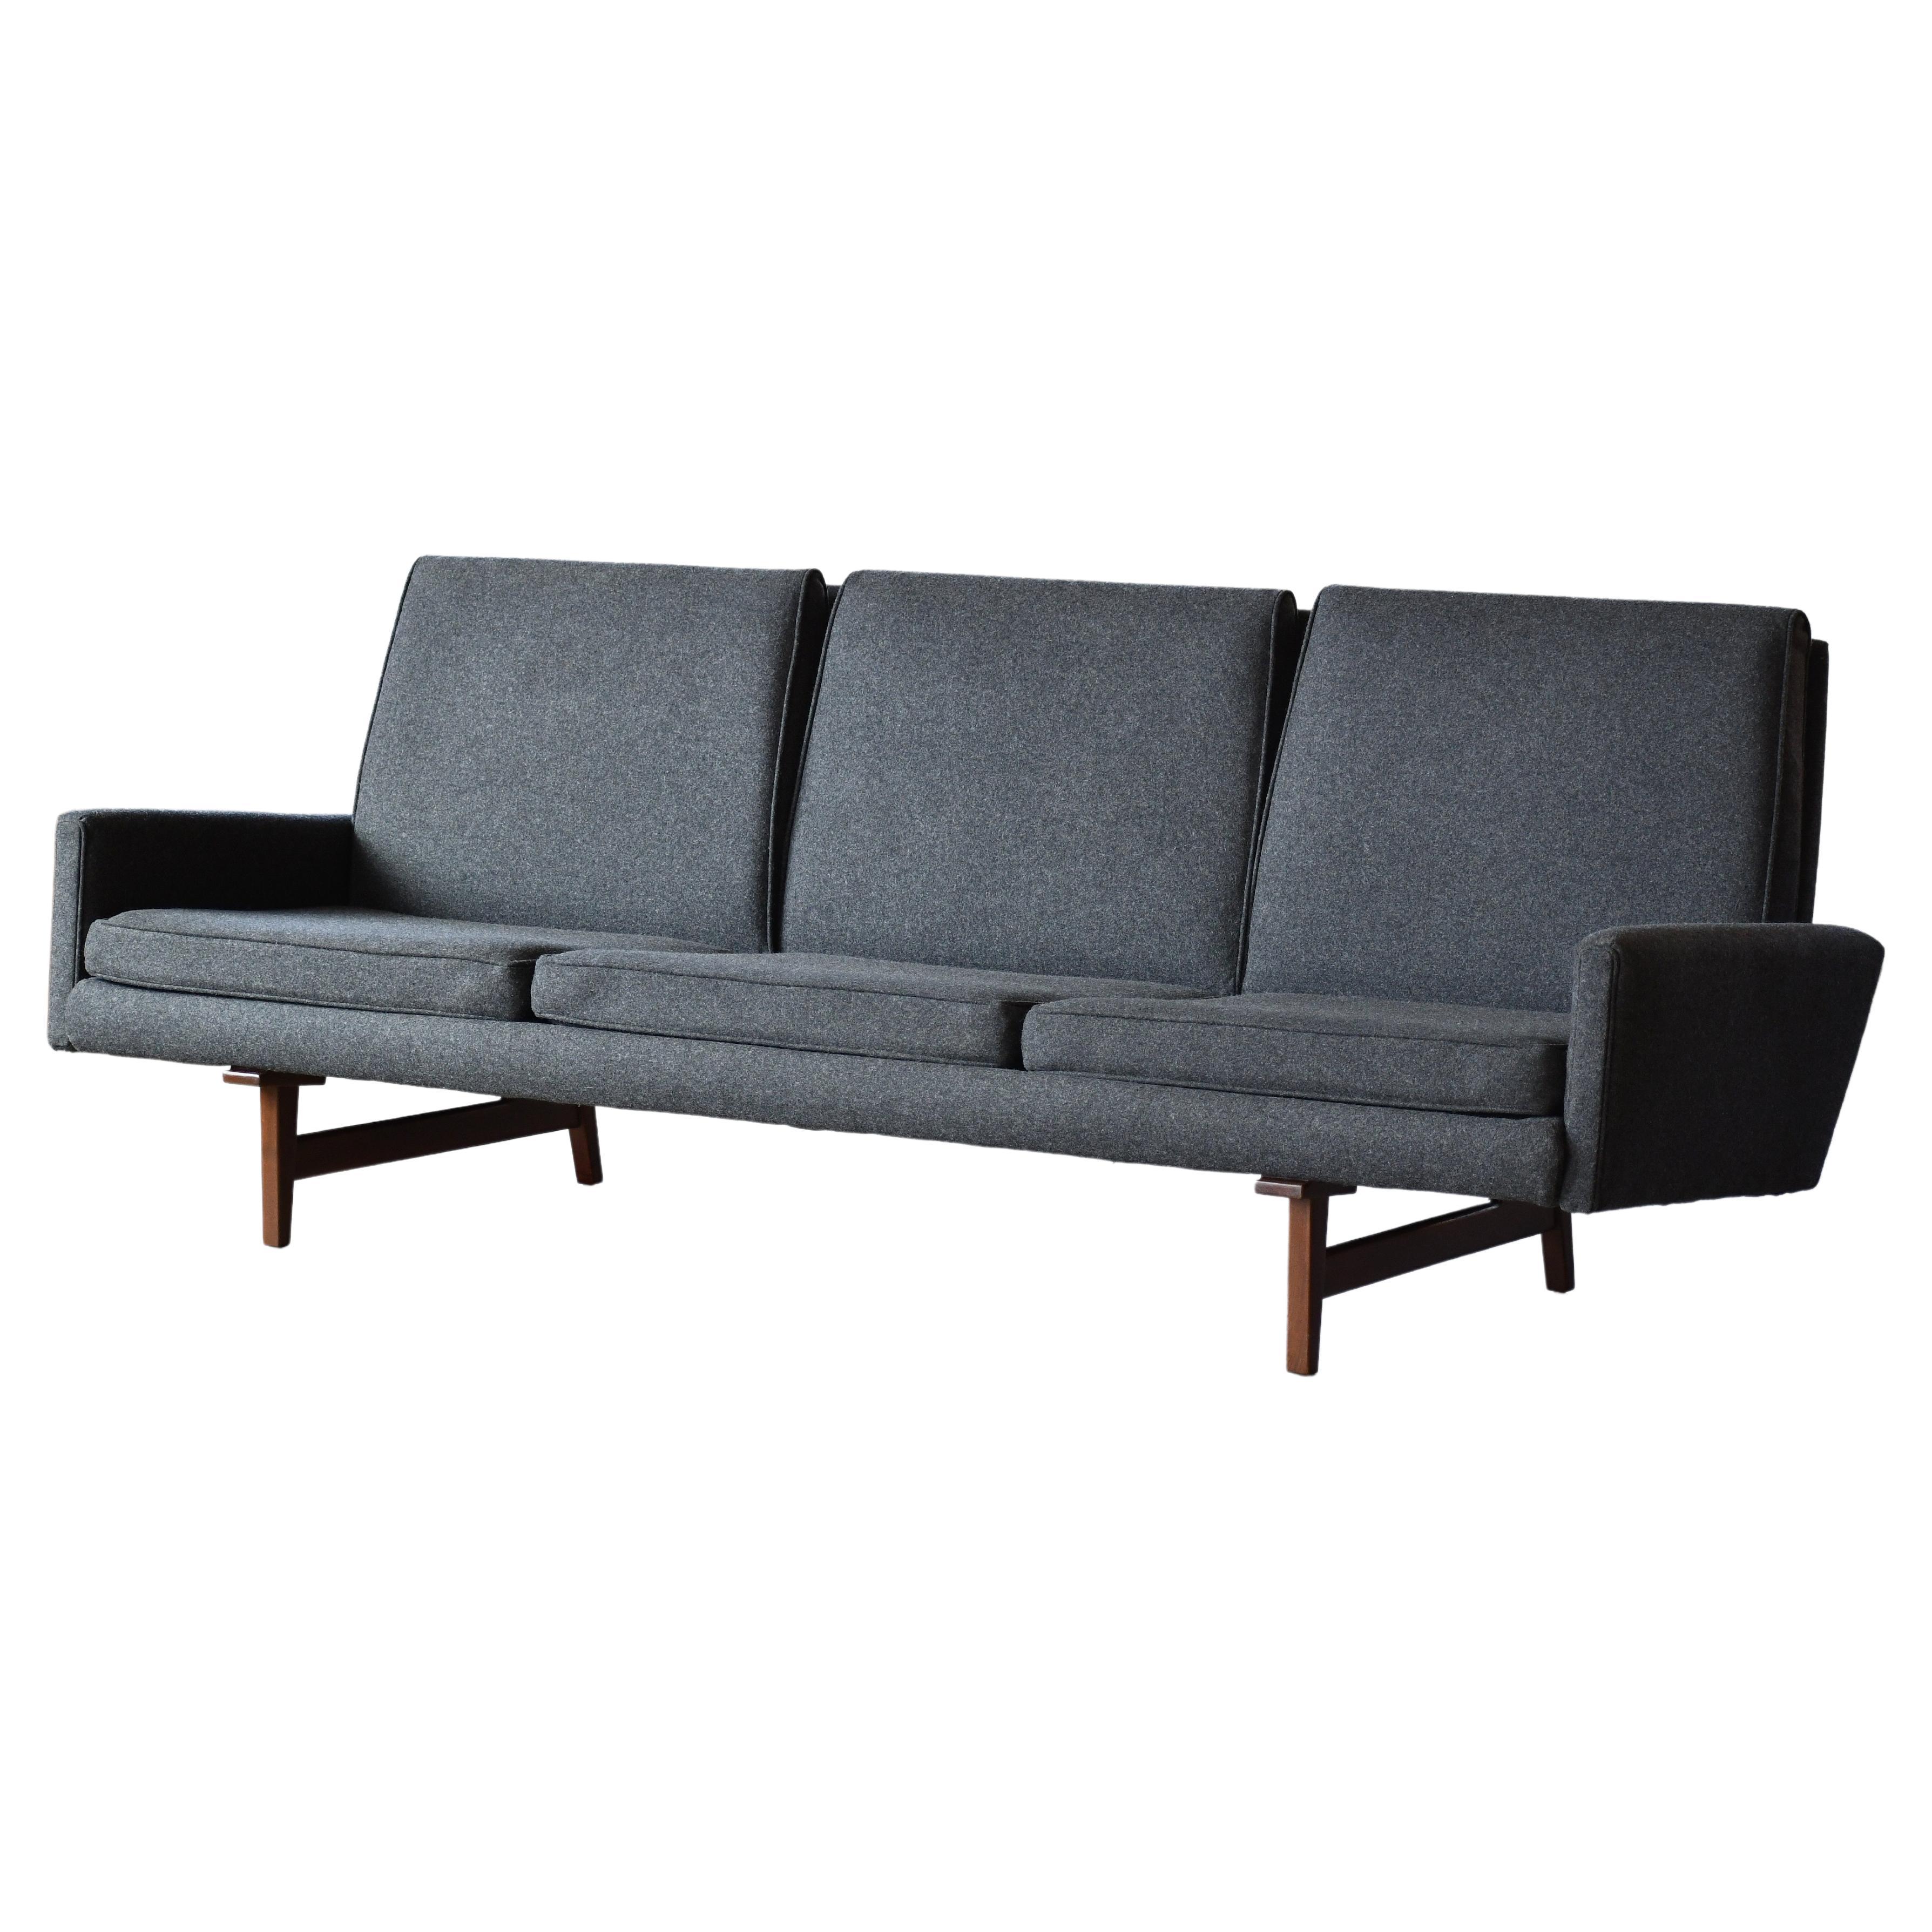 Mid-Century Sofa in Walnut by Jens Risom Newly Reupholstered in Charcoal Wool